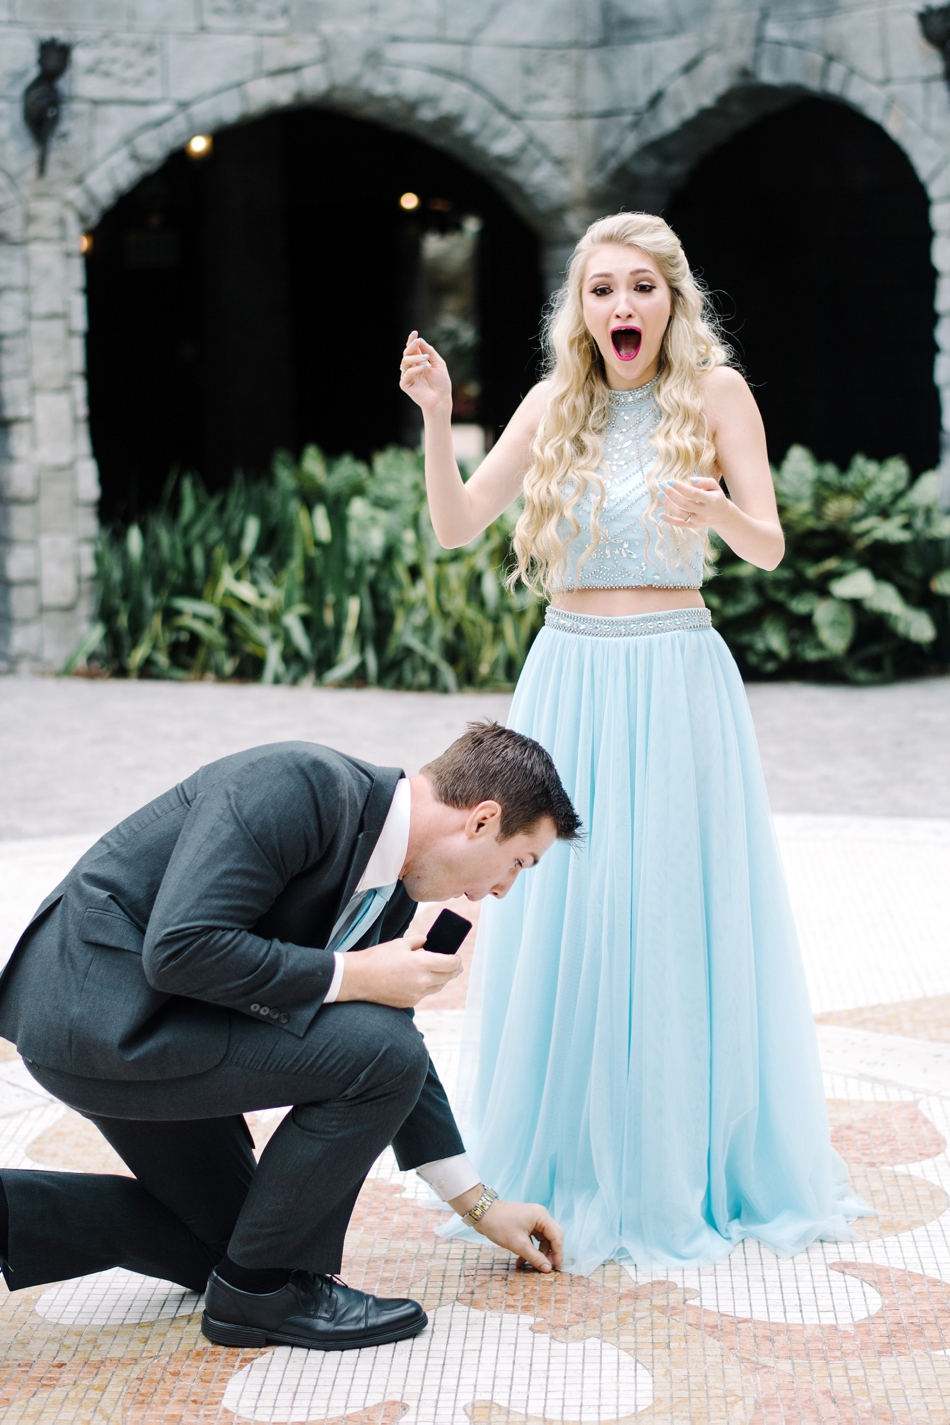 guy drops ring during proposal